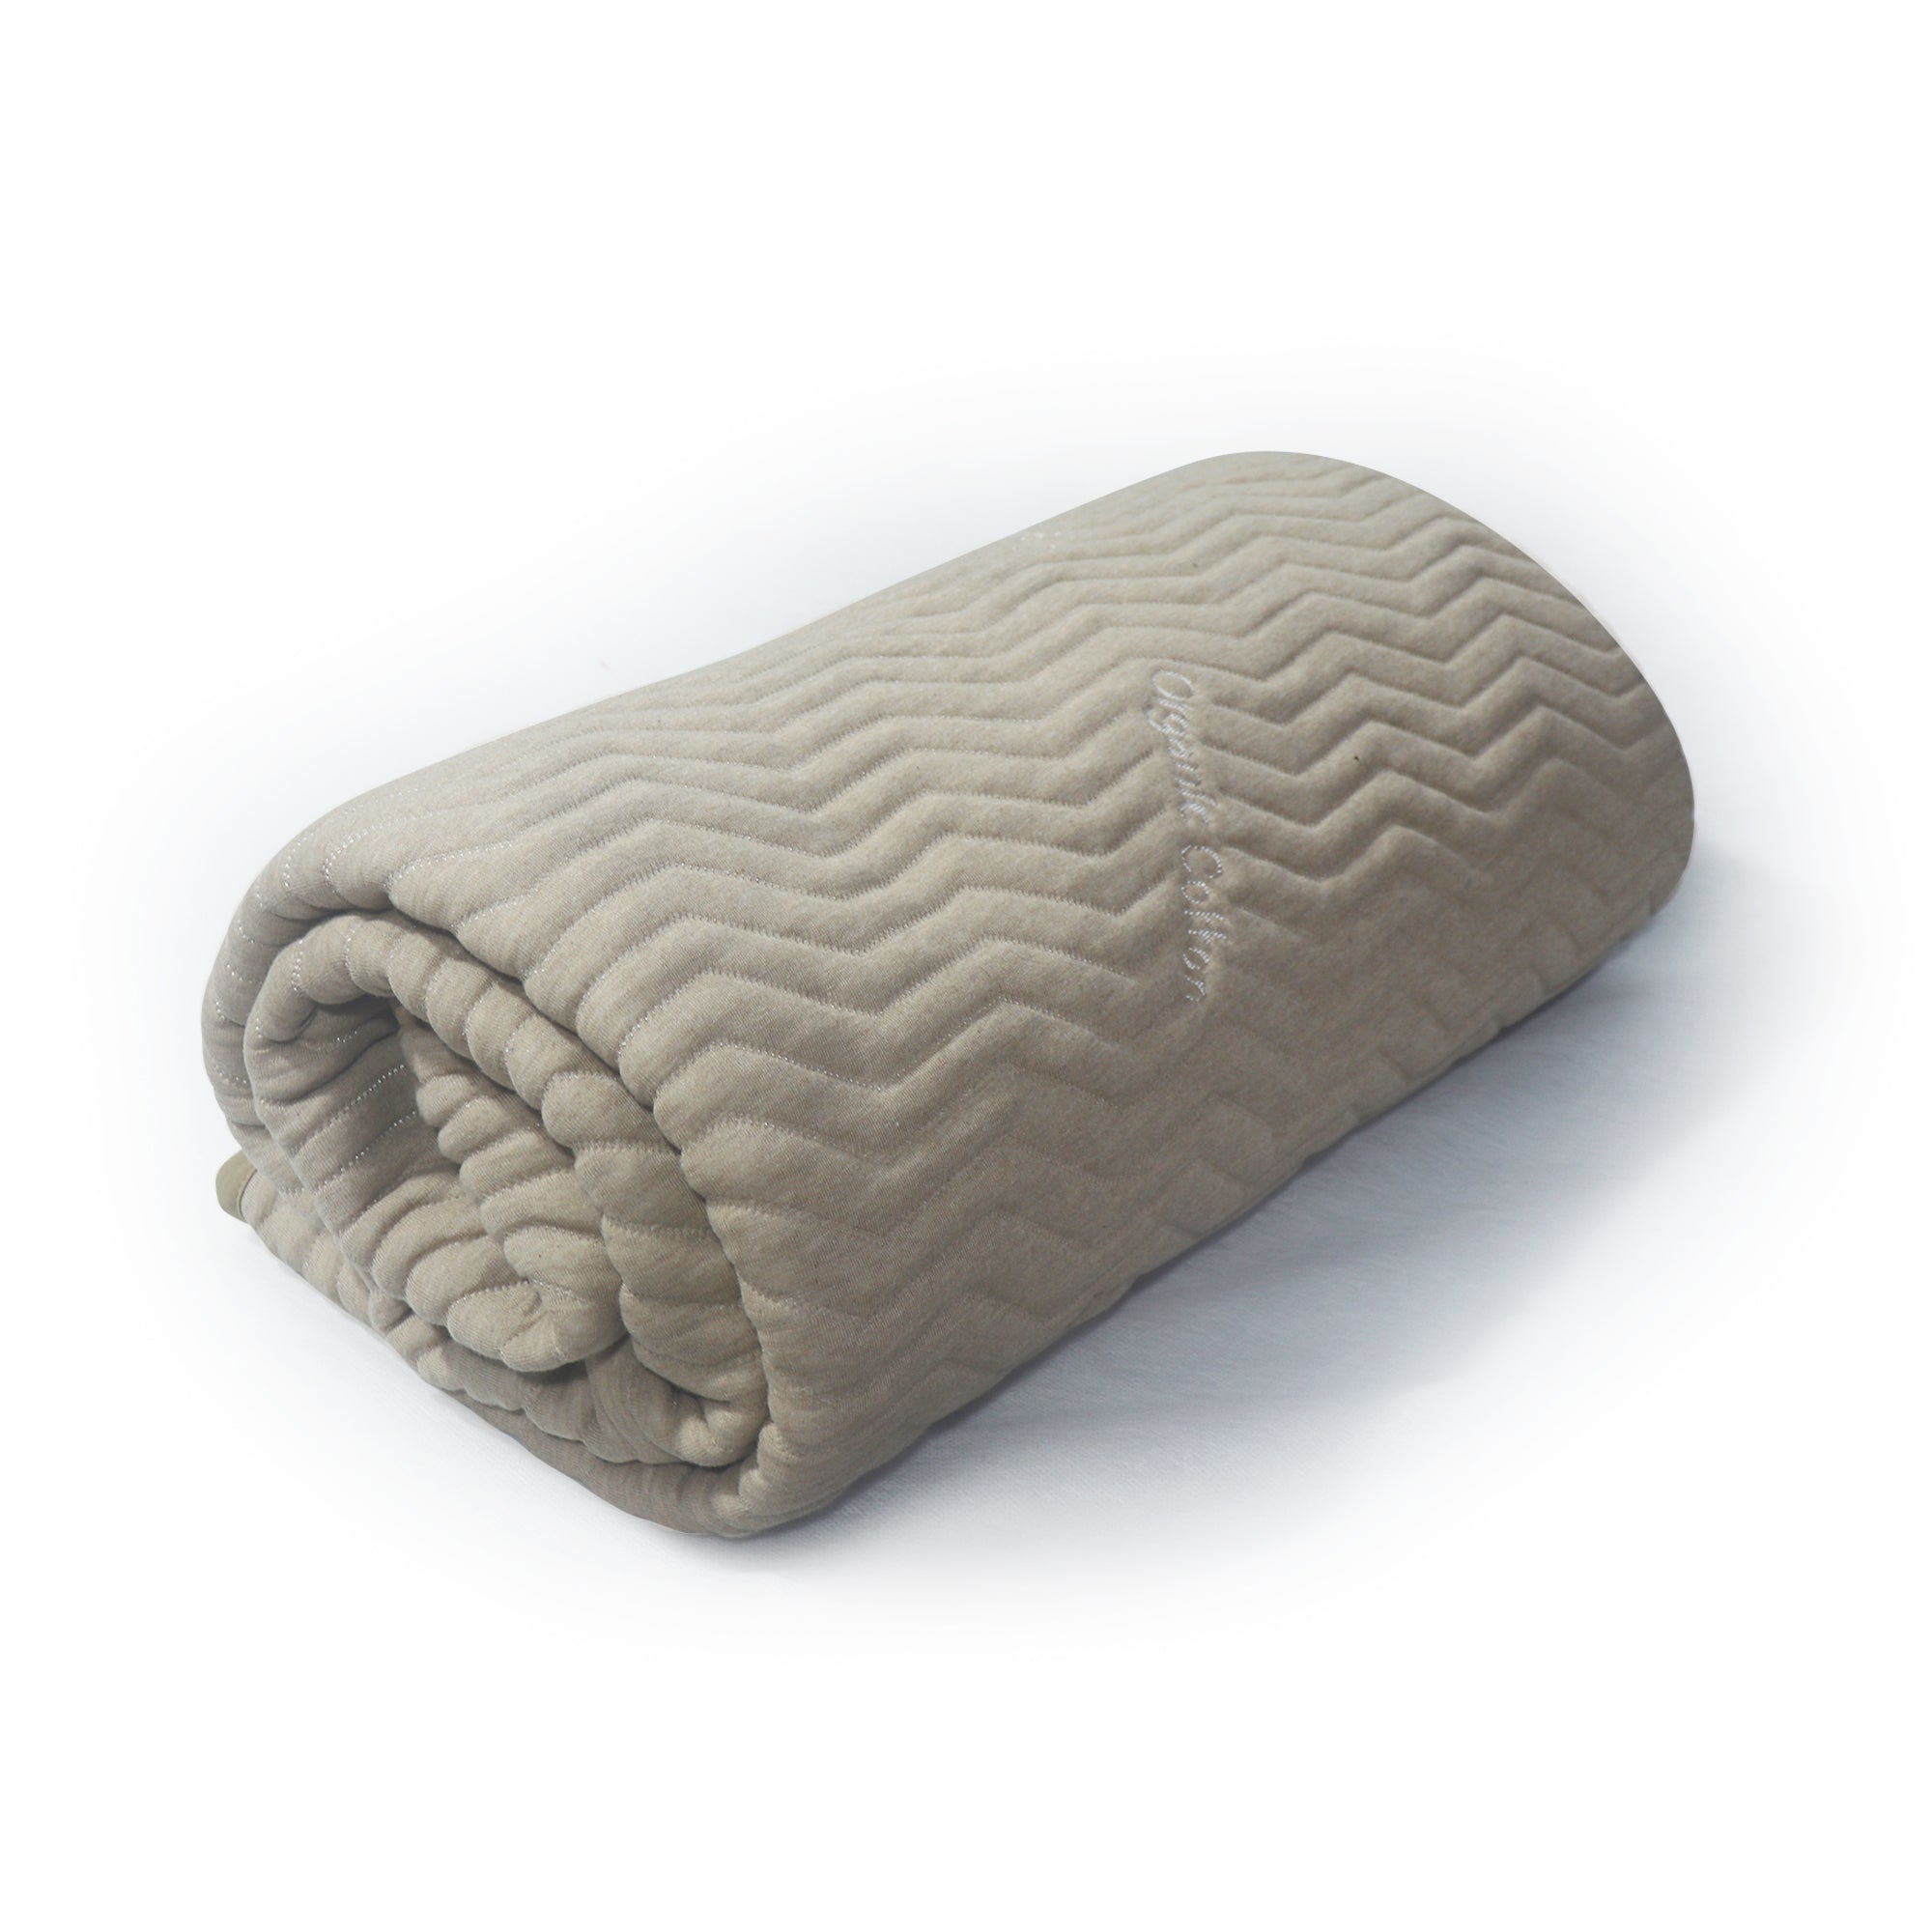 Beige AC 100% Cotton Outer Blanket - Jersey Jaquard